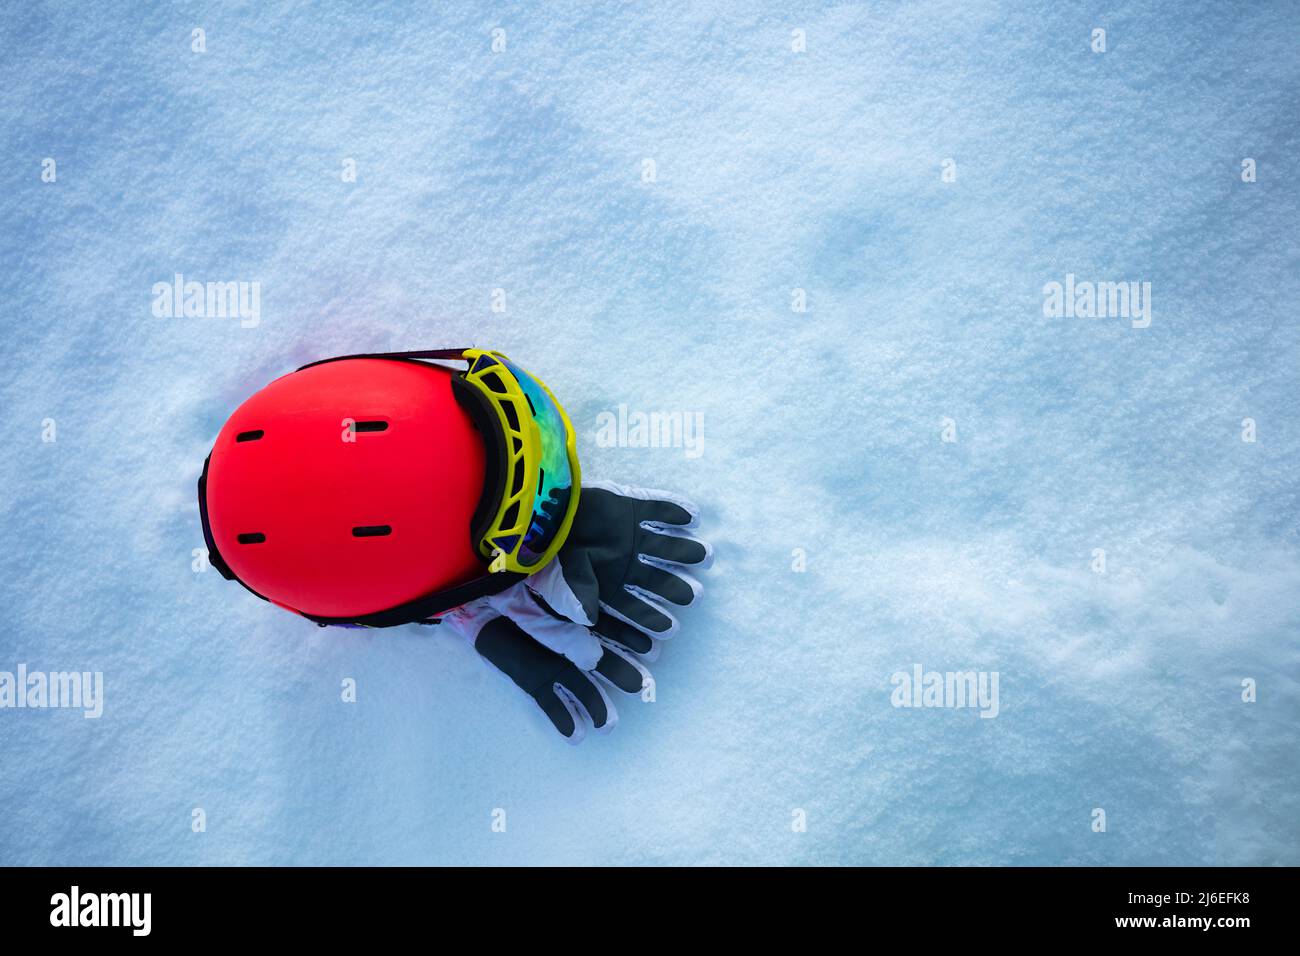 Pink sport helmet with ski mask and winter gloves Stock Photo